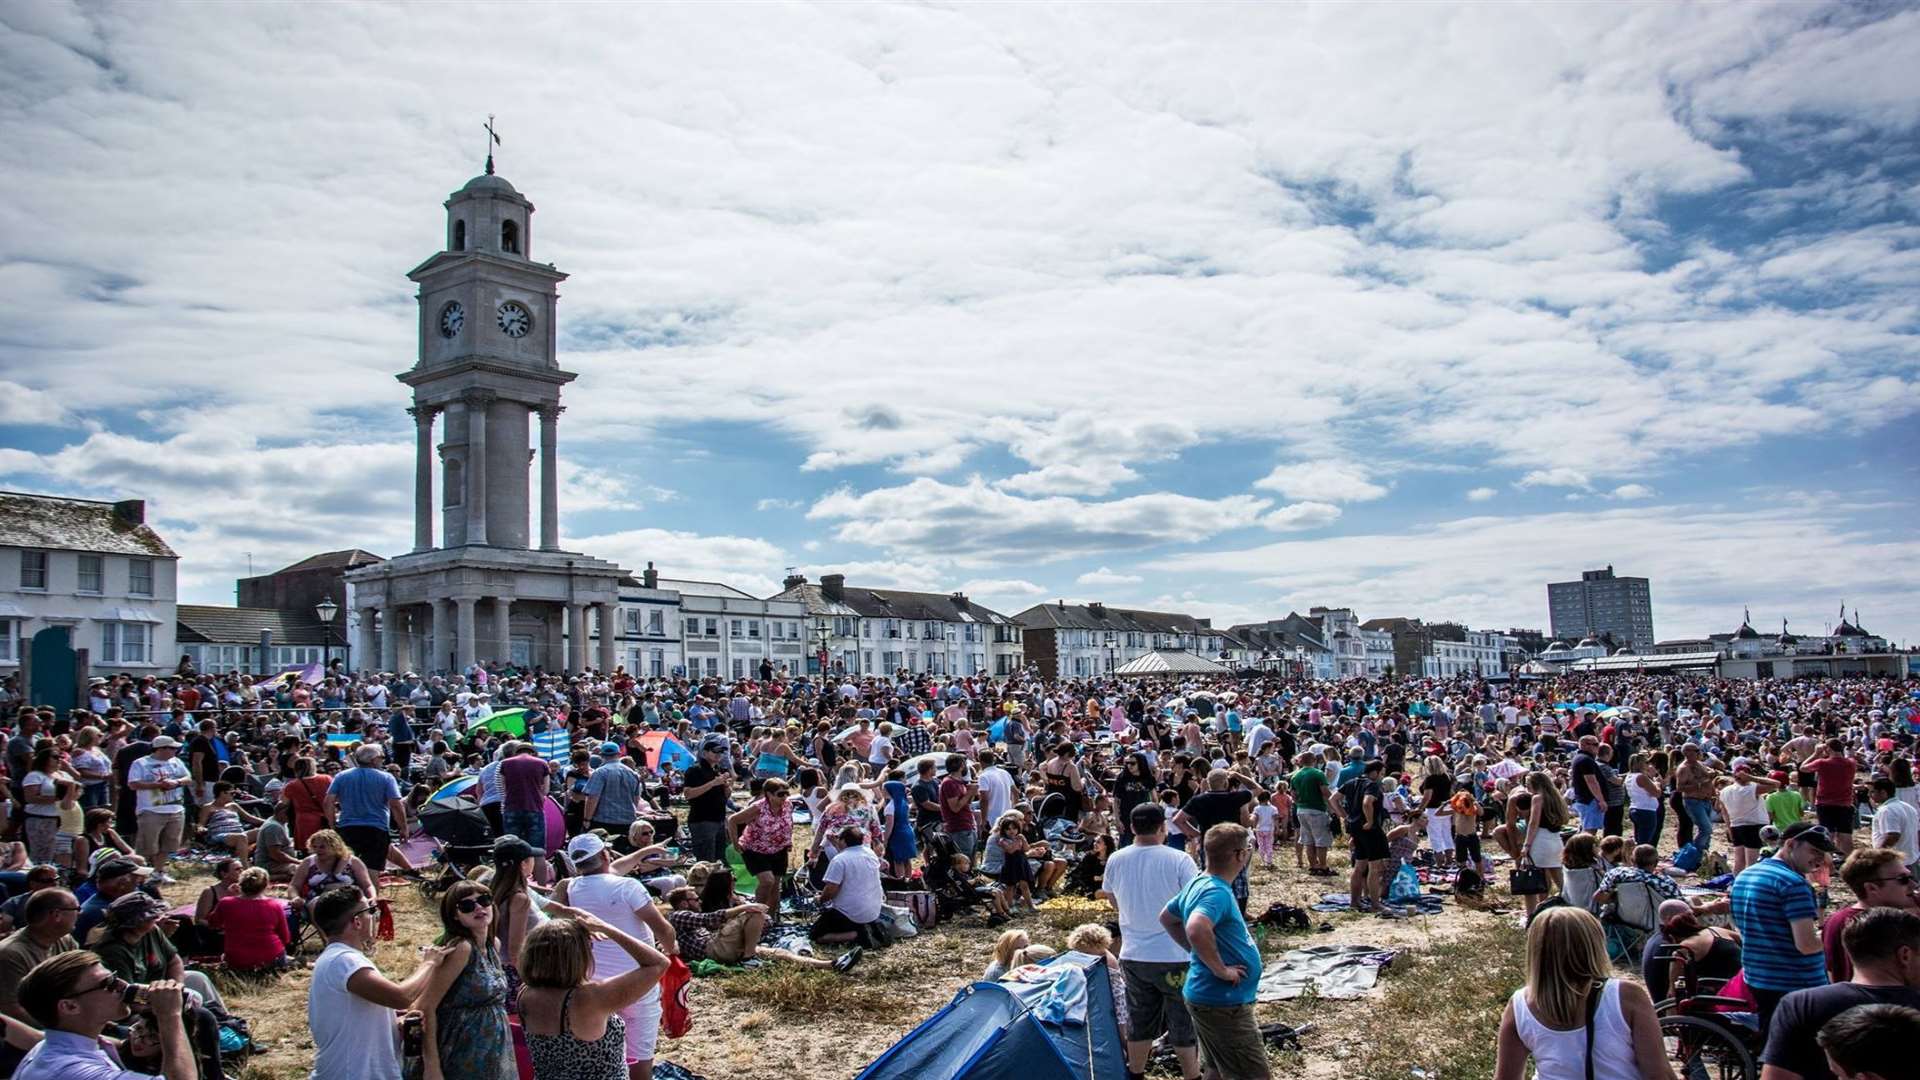 Crowds watched the Herne Bay Airshow last year